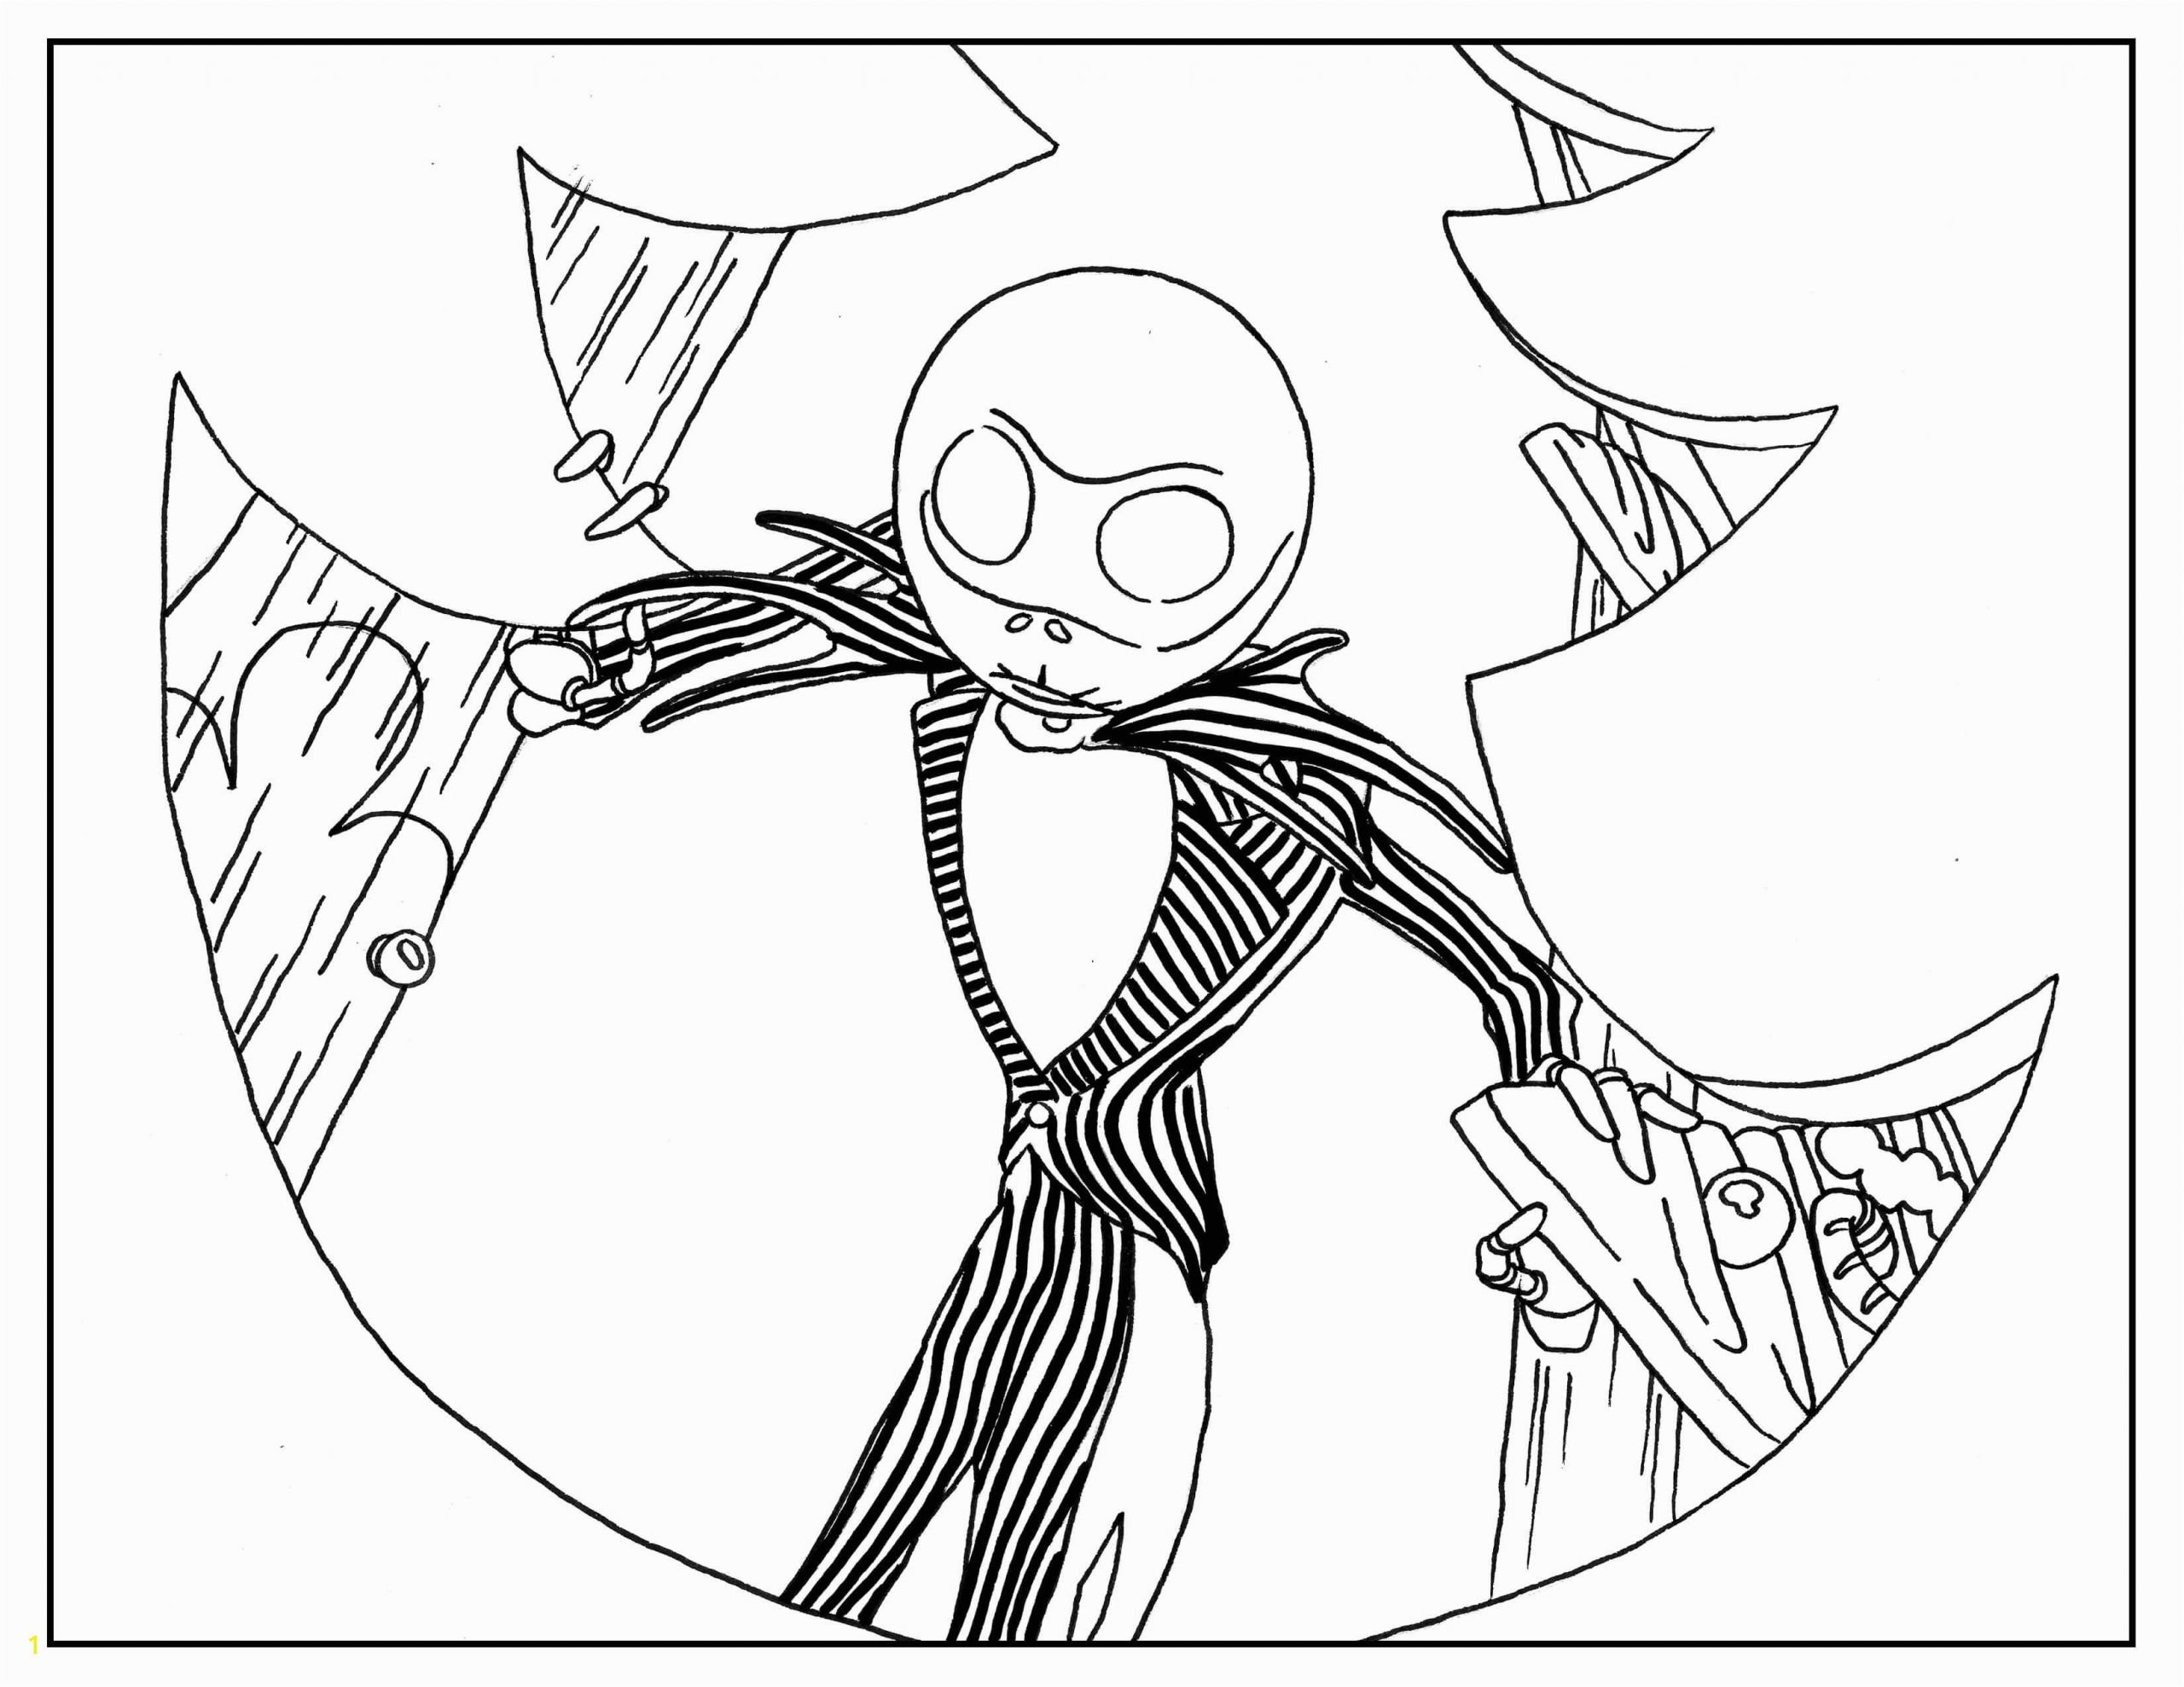 Nightmare before Christmas Characters Coloring Pages Nightmare before Christmas Characters Coloring Pages